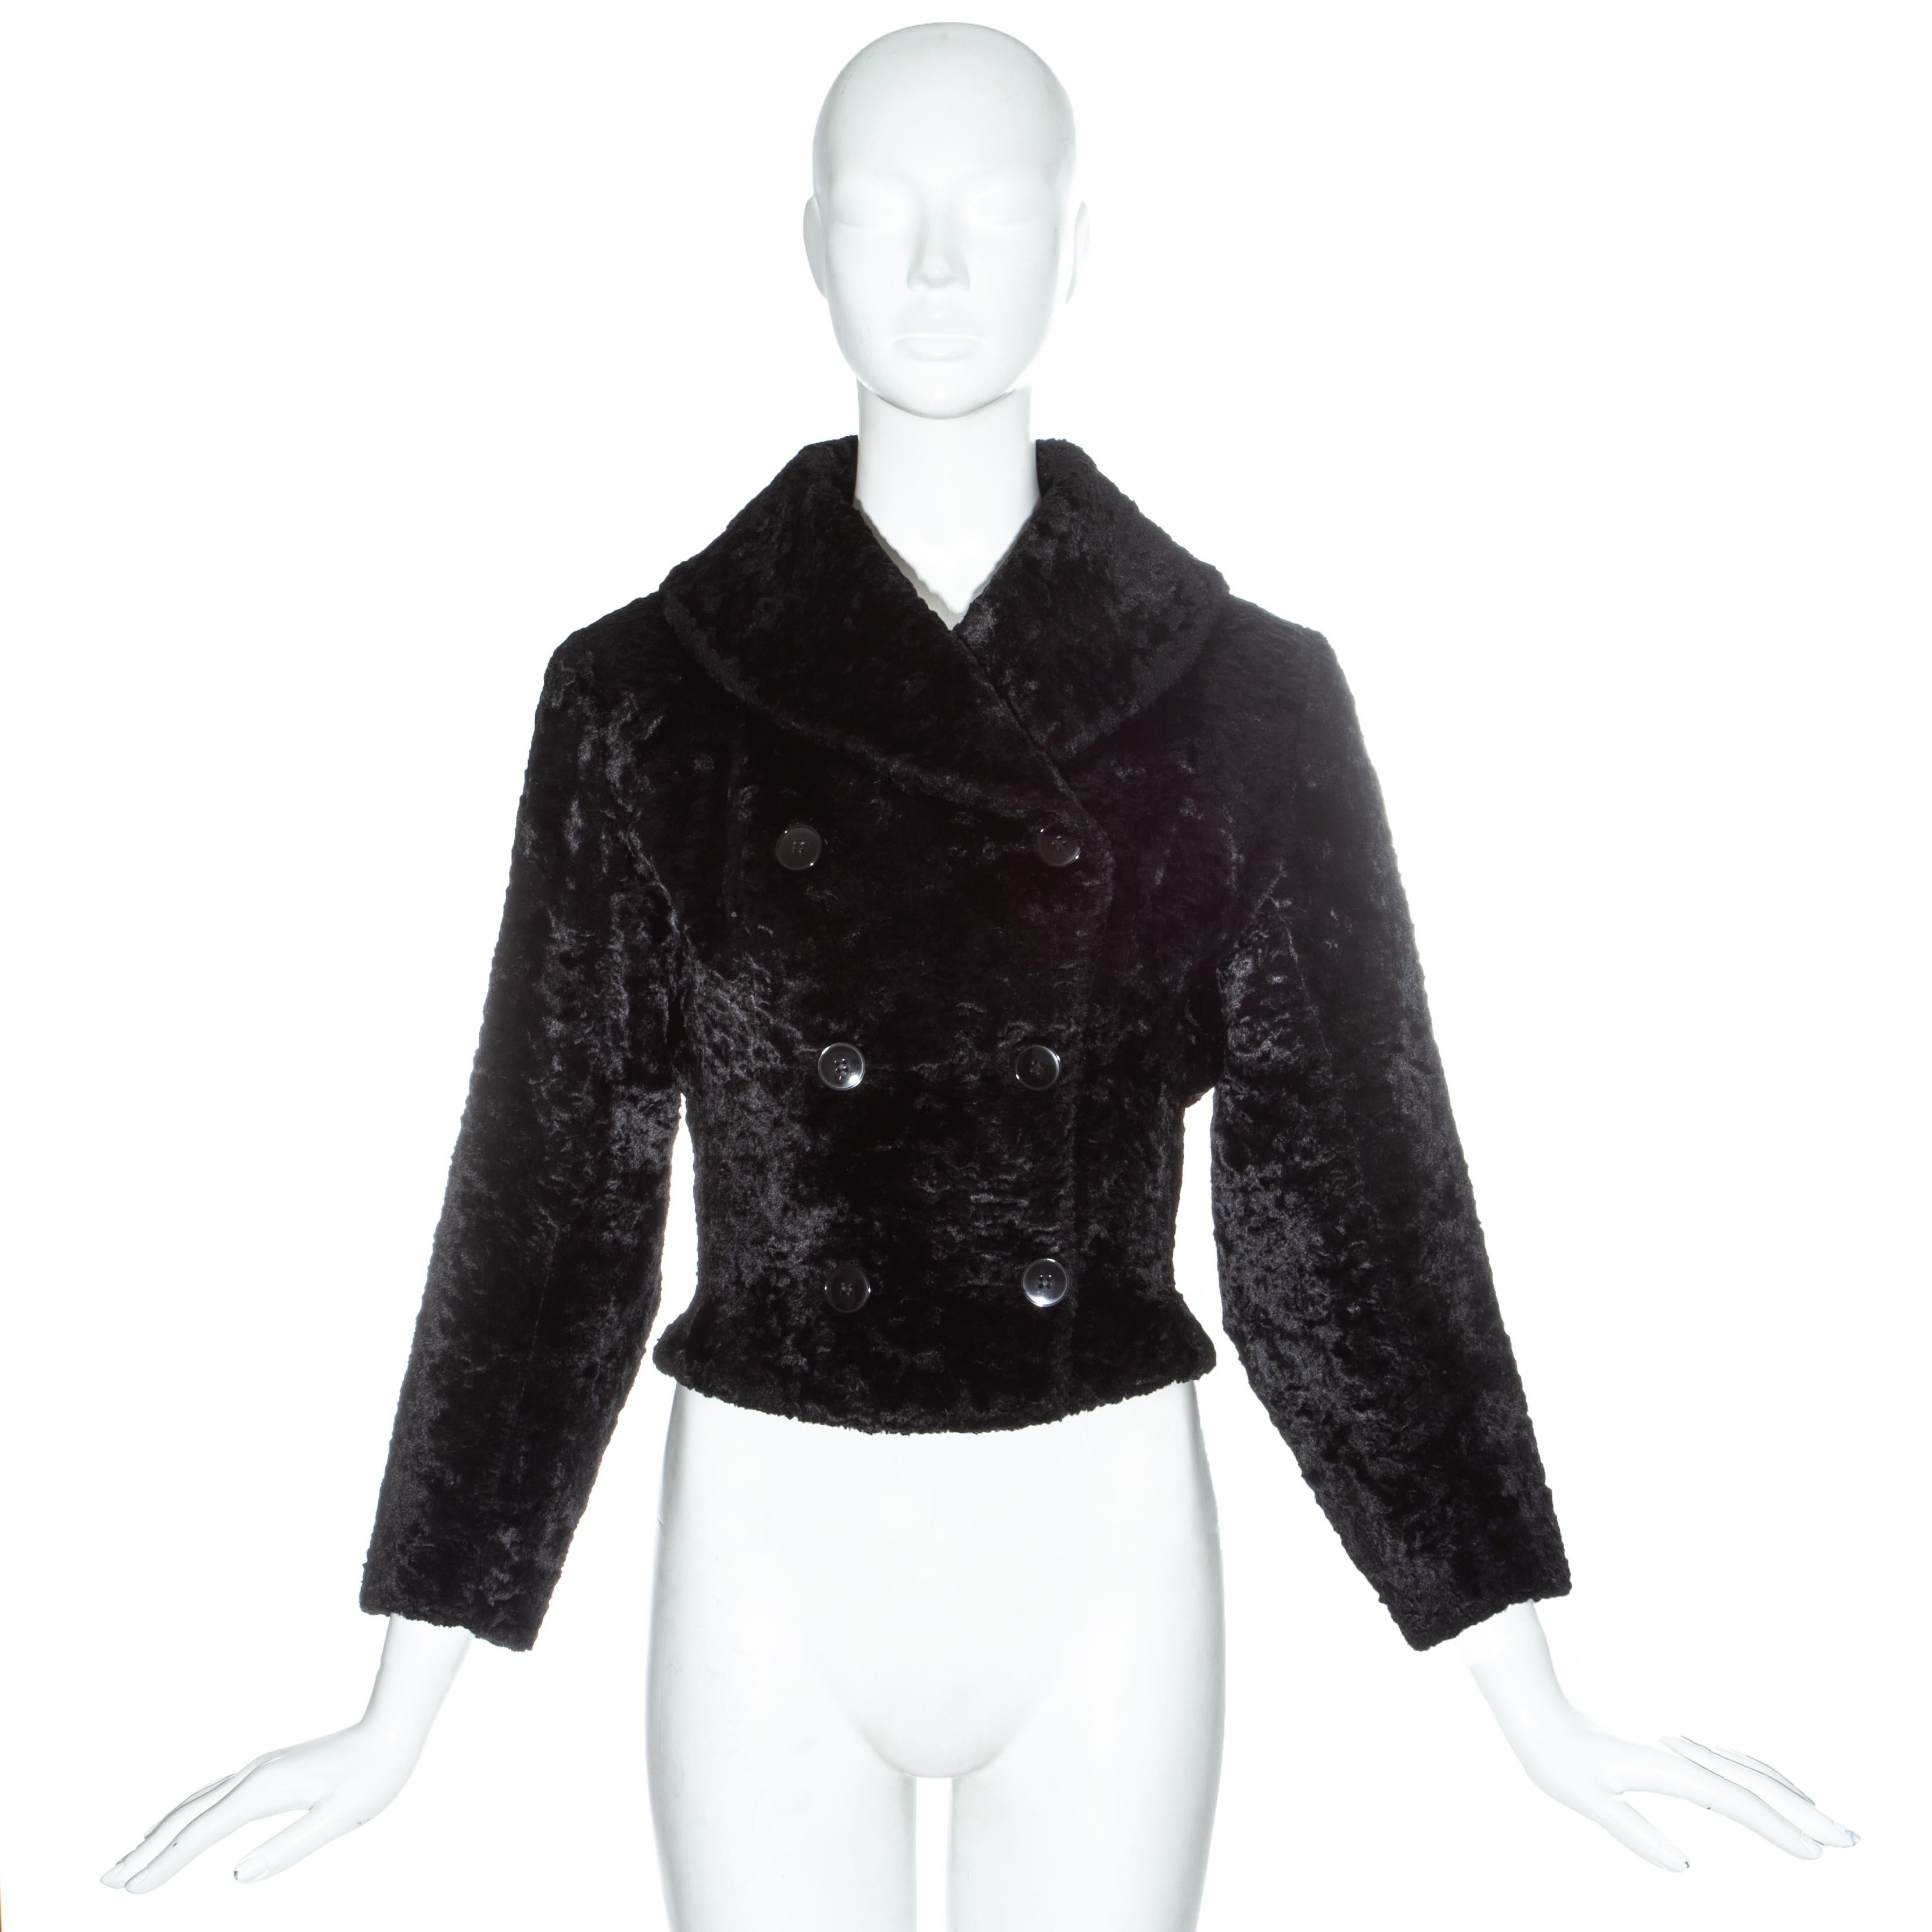 Azzedine Alaia black chenille double breasted jacket with shawl lapel and silk lining

Fall-Winter 1992
